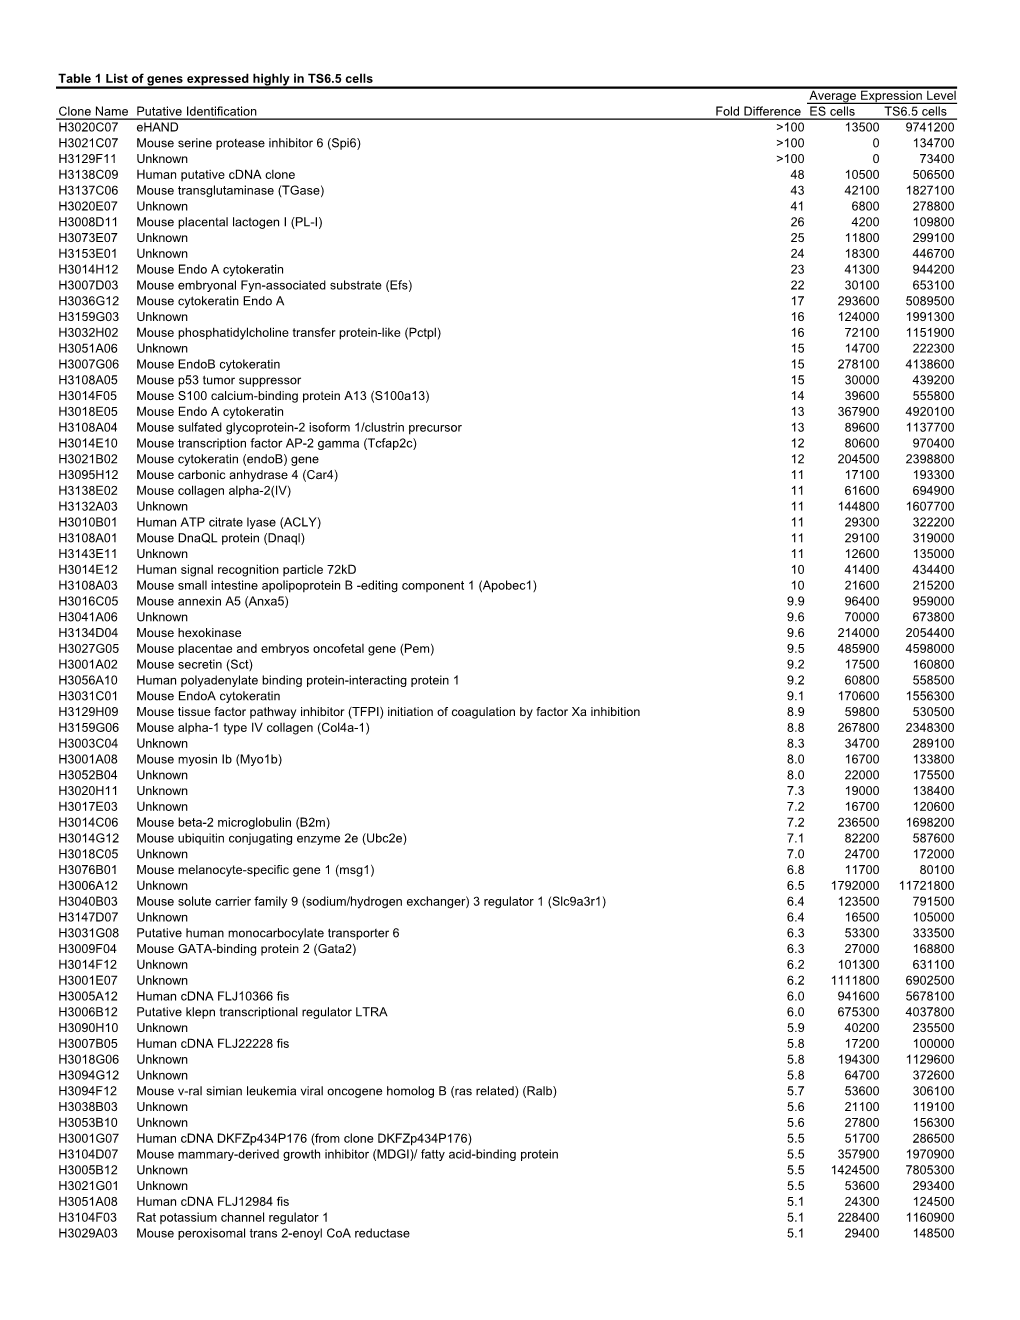 Table 1 List of Genes Expressed Highly in TS6.5 Cells Average Expression